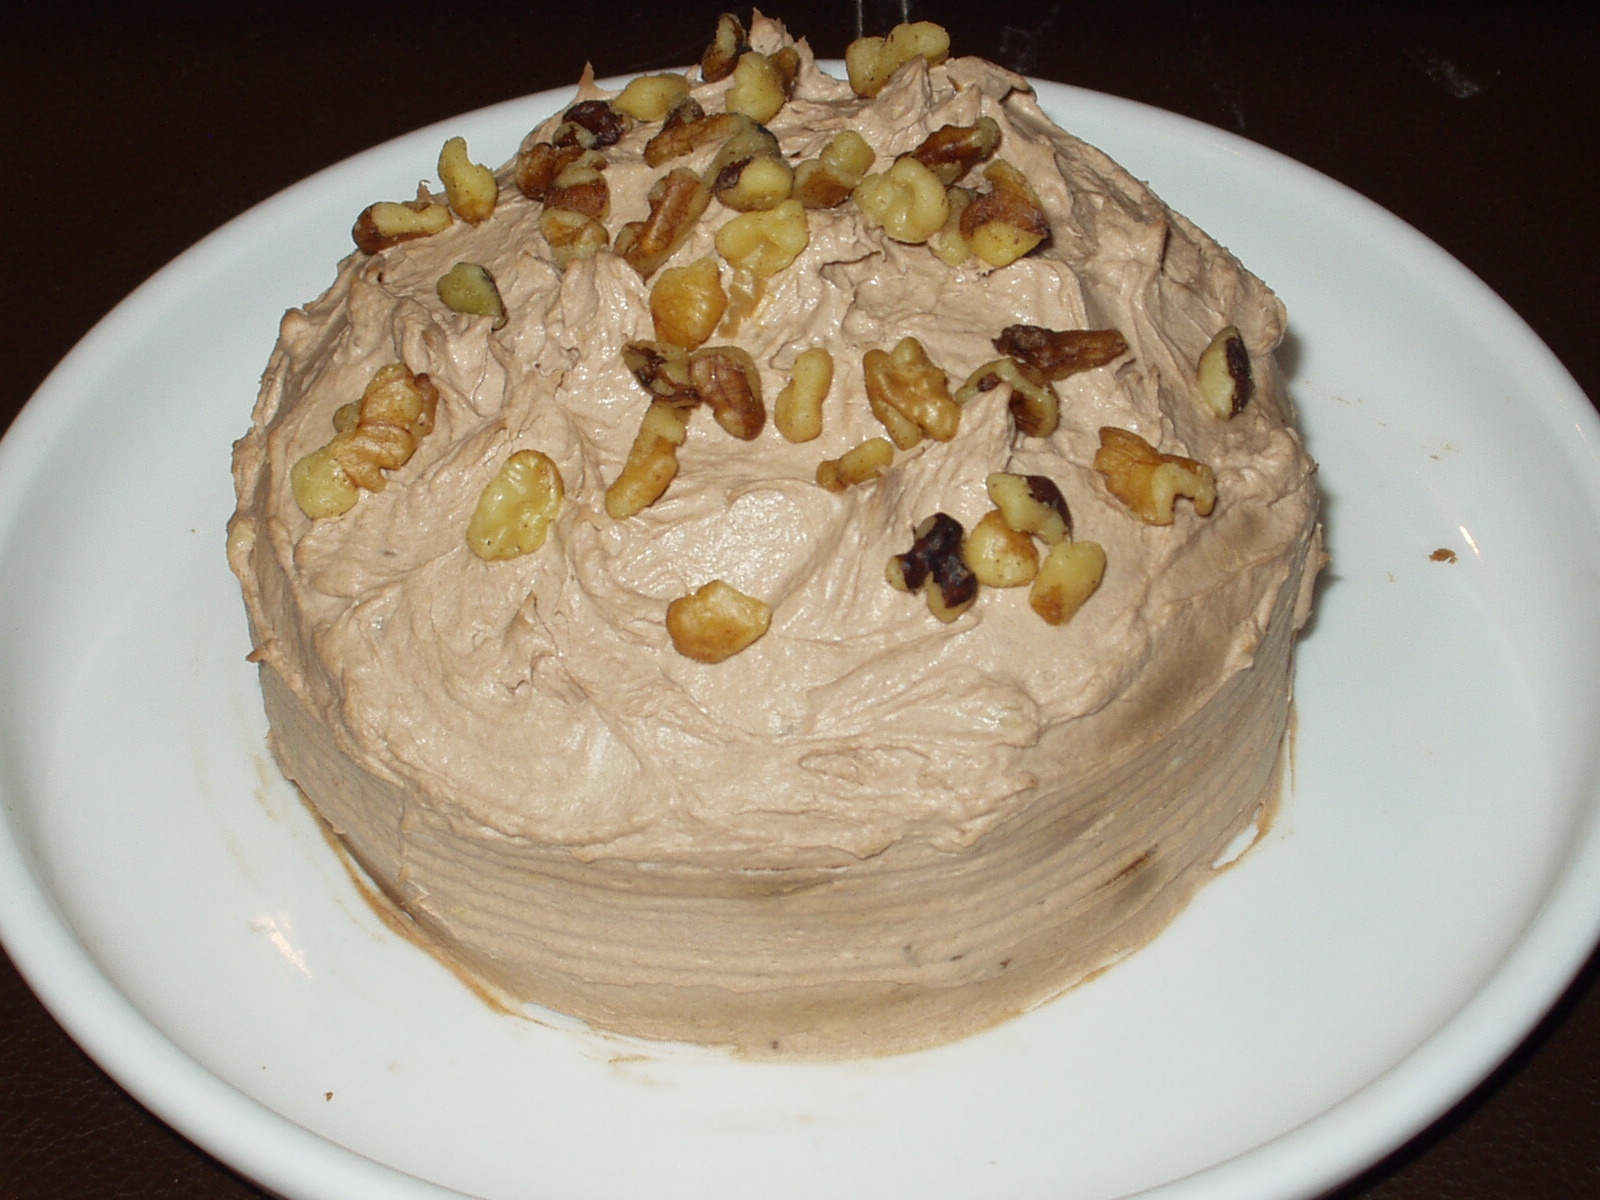 Carob-Banana-Peanut Butter Double Layer Cake with Carob-Cream Cheese and Walnut Frostin Image